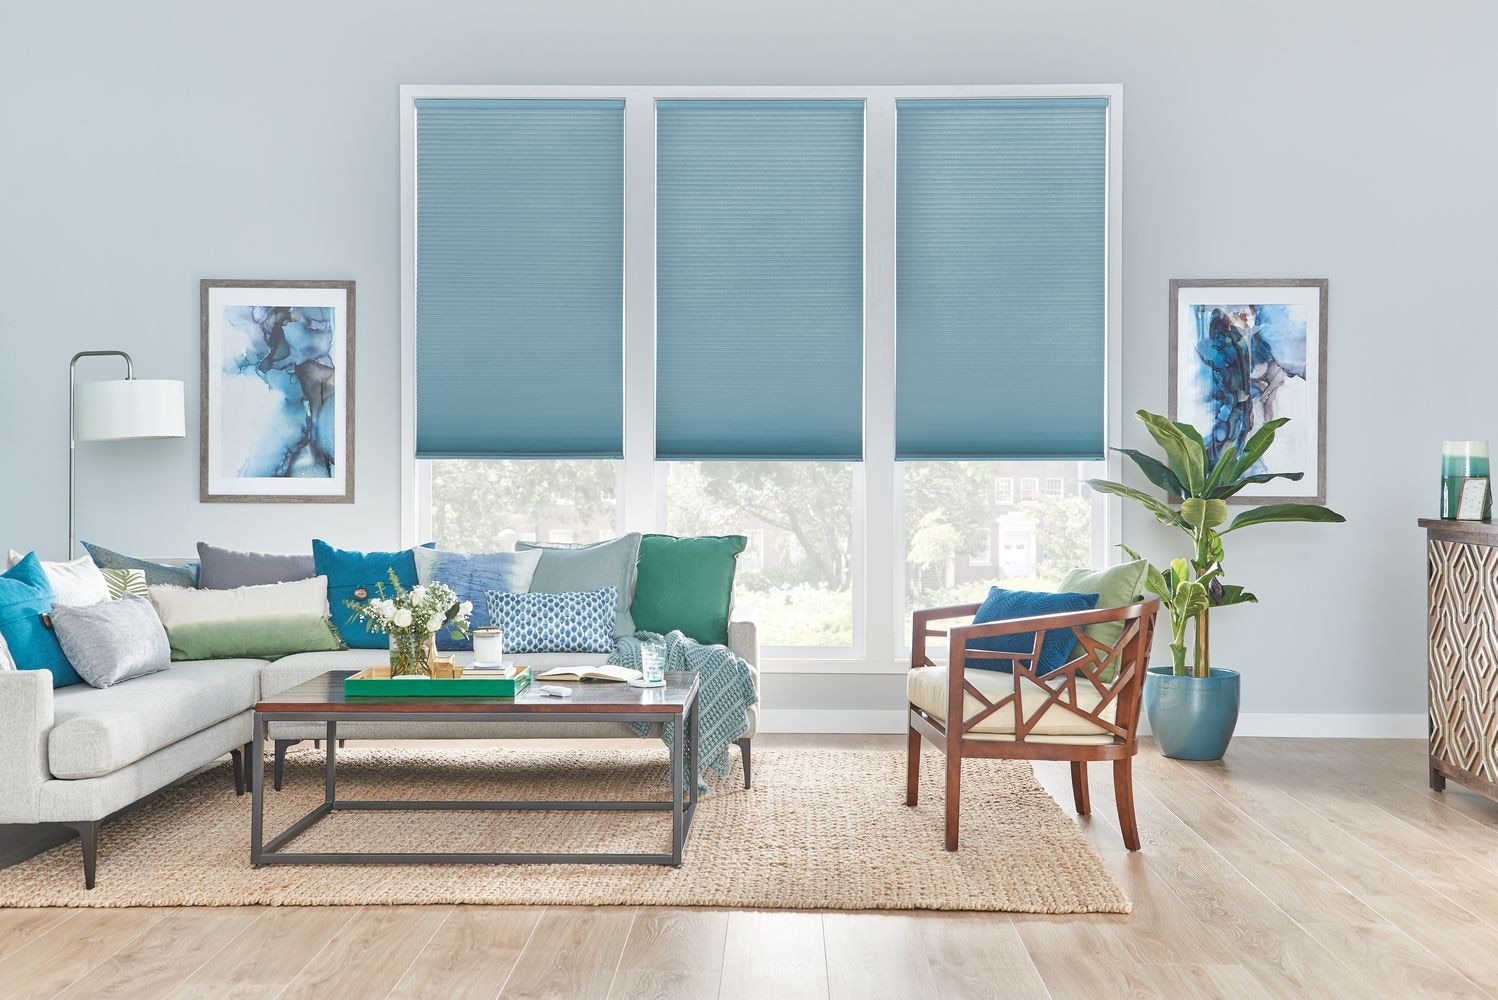 28 NEW Light Filtering Single Cell Cordless Cellular Shades Blinds 27 3/4 x 54 